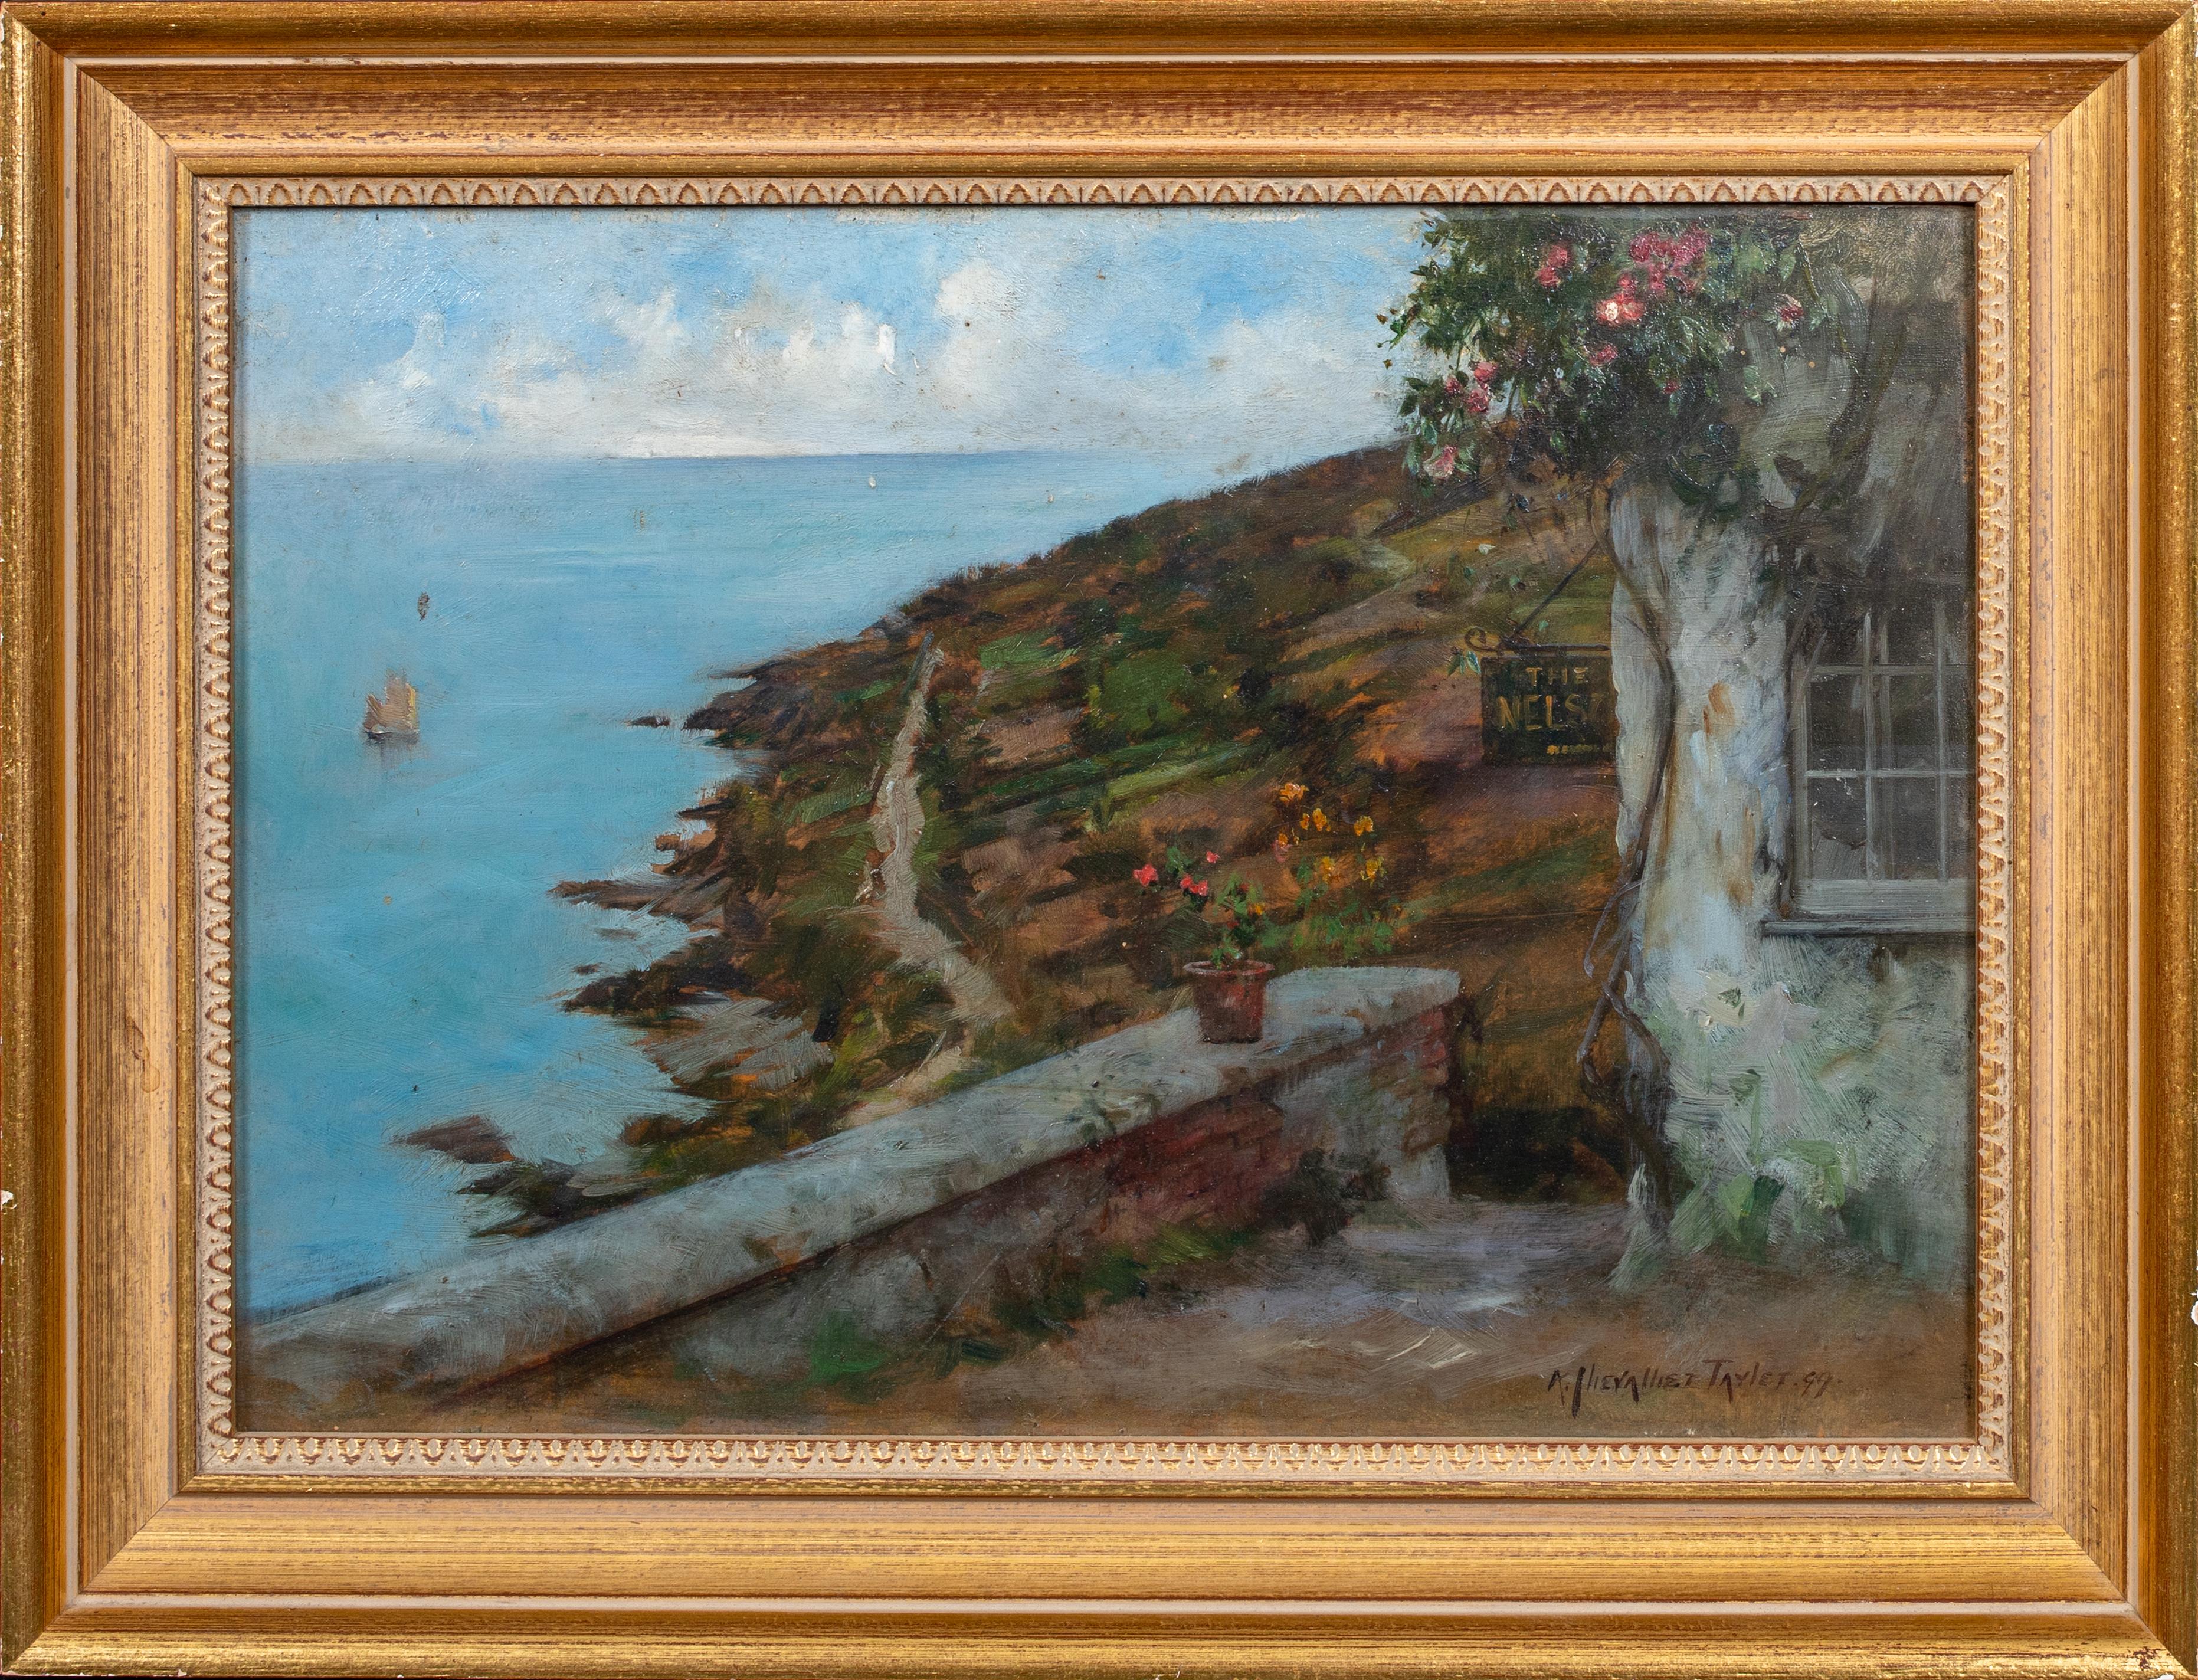 Albert Chevallier Tayler Landscape Painting - View Of The Coast, Cornwall, dated 1899